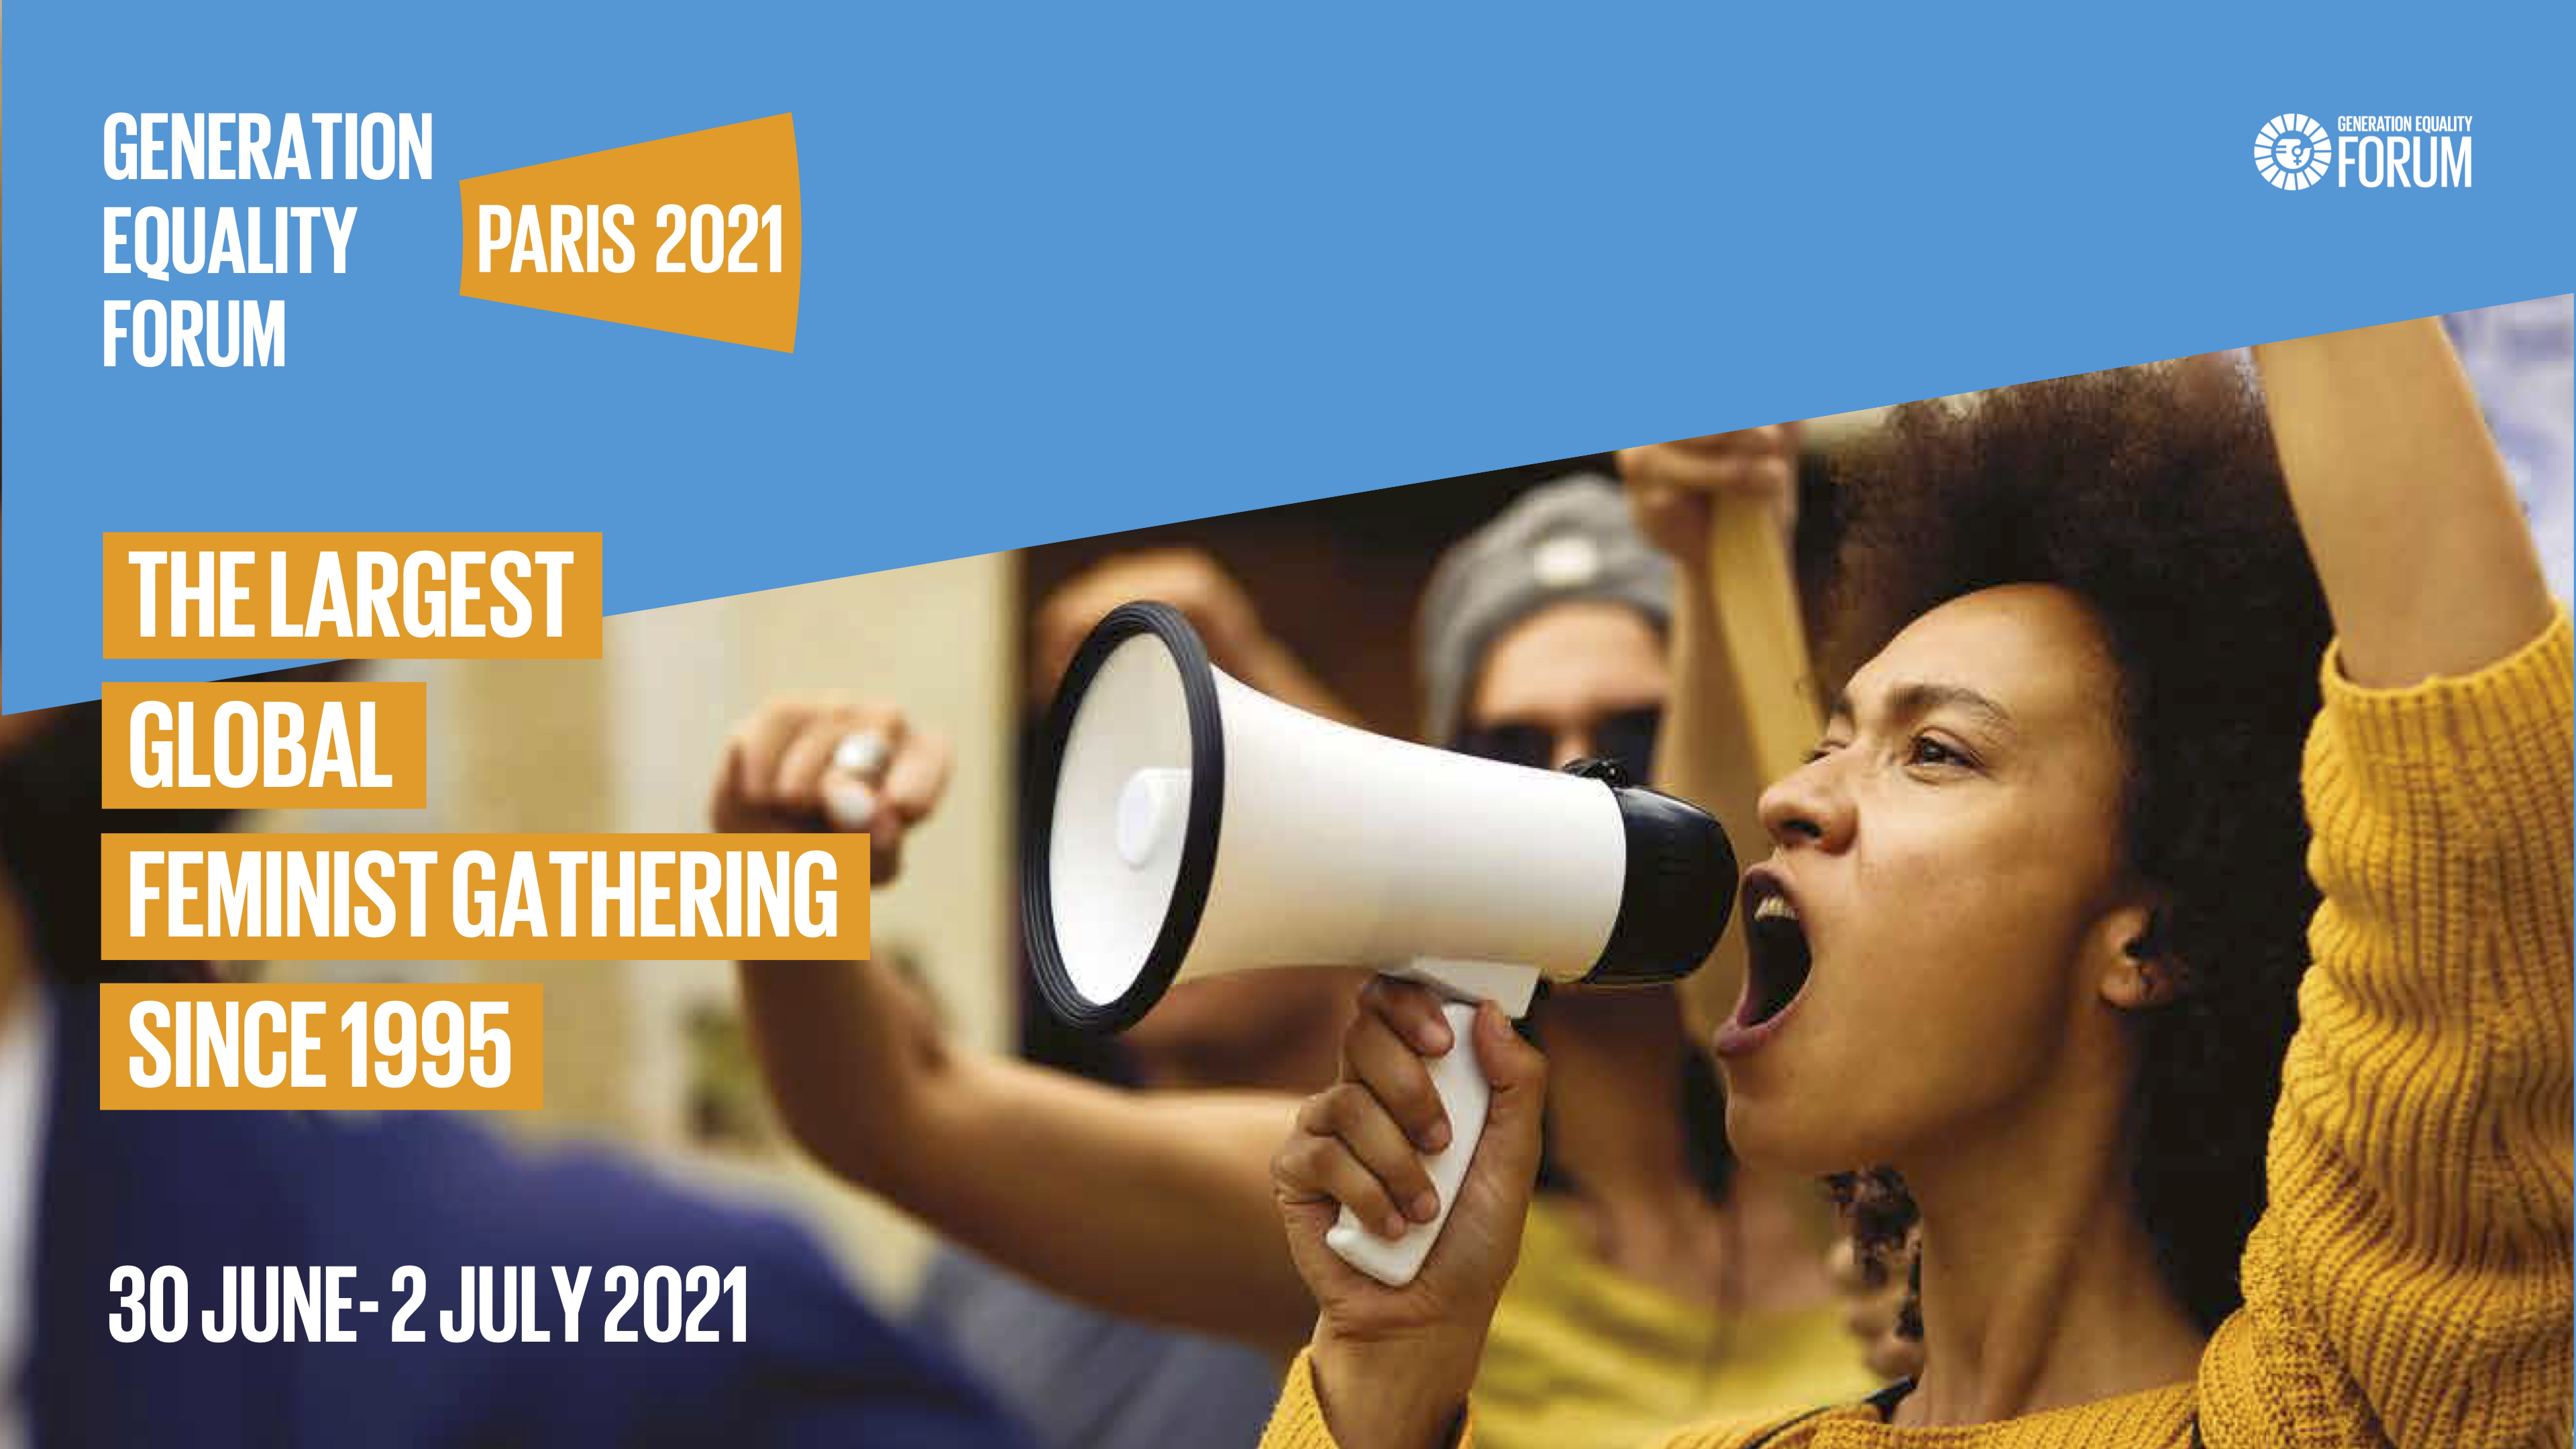 Text: Generation Equality Forum: The largest global feminist gathering since 1995, June 30-July 2 with image of a woman shouting into a megaphone